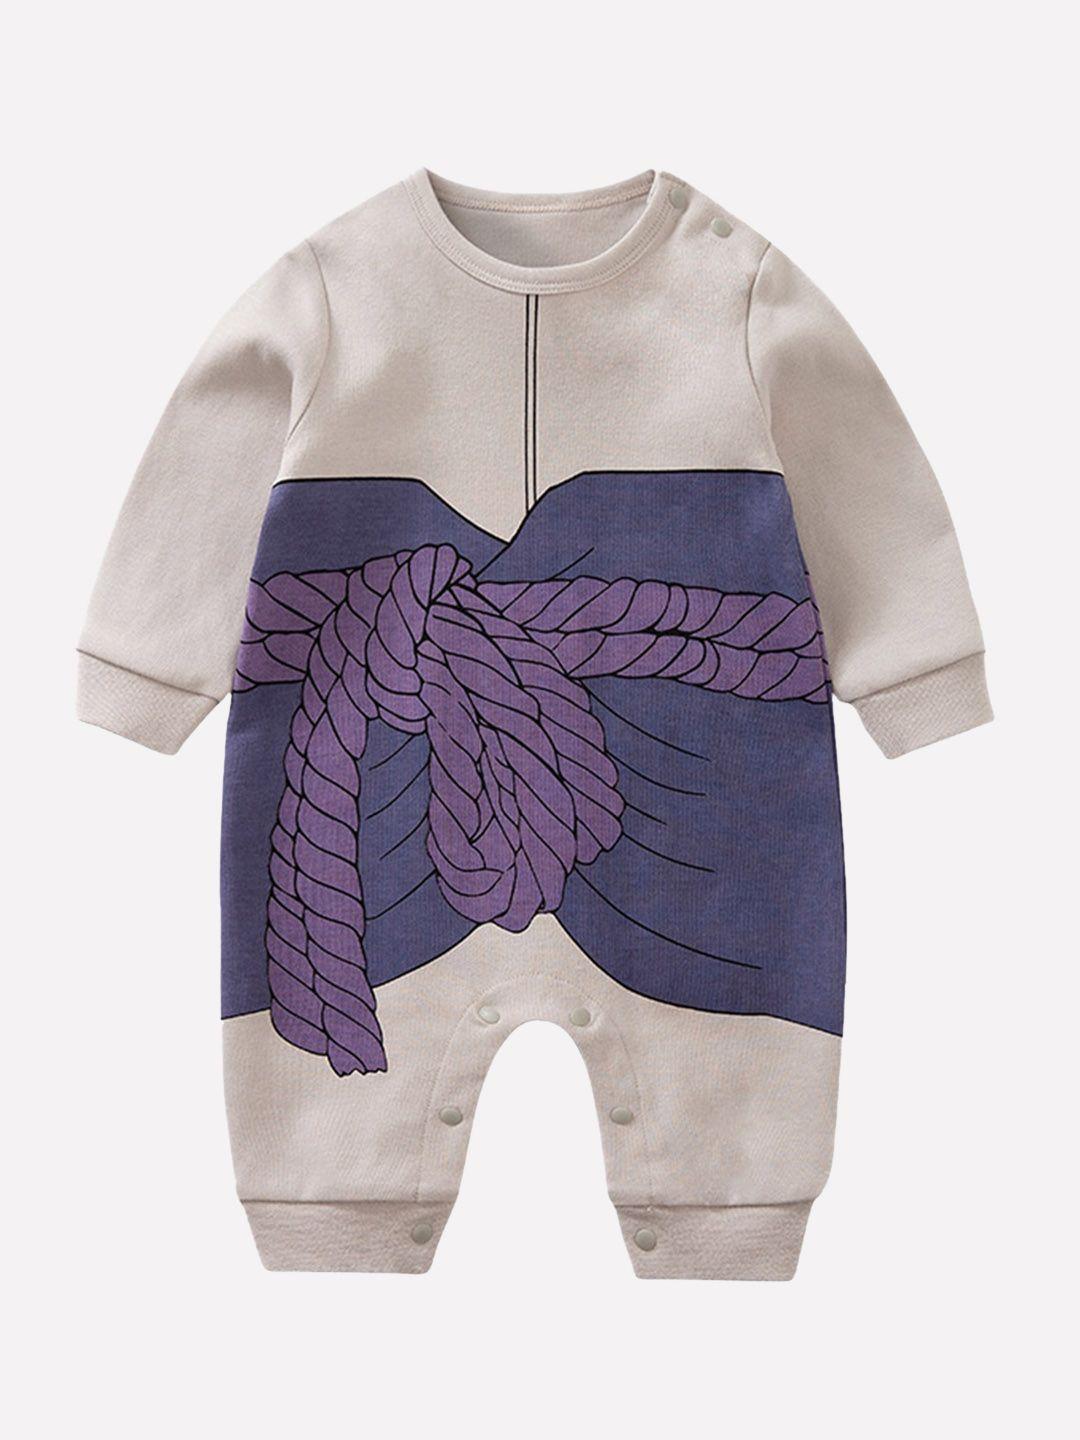 stylecast infant boys grey blue printed cotton rompers